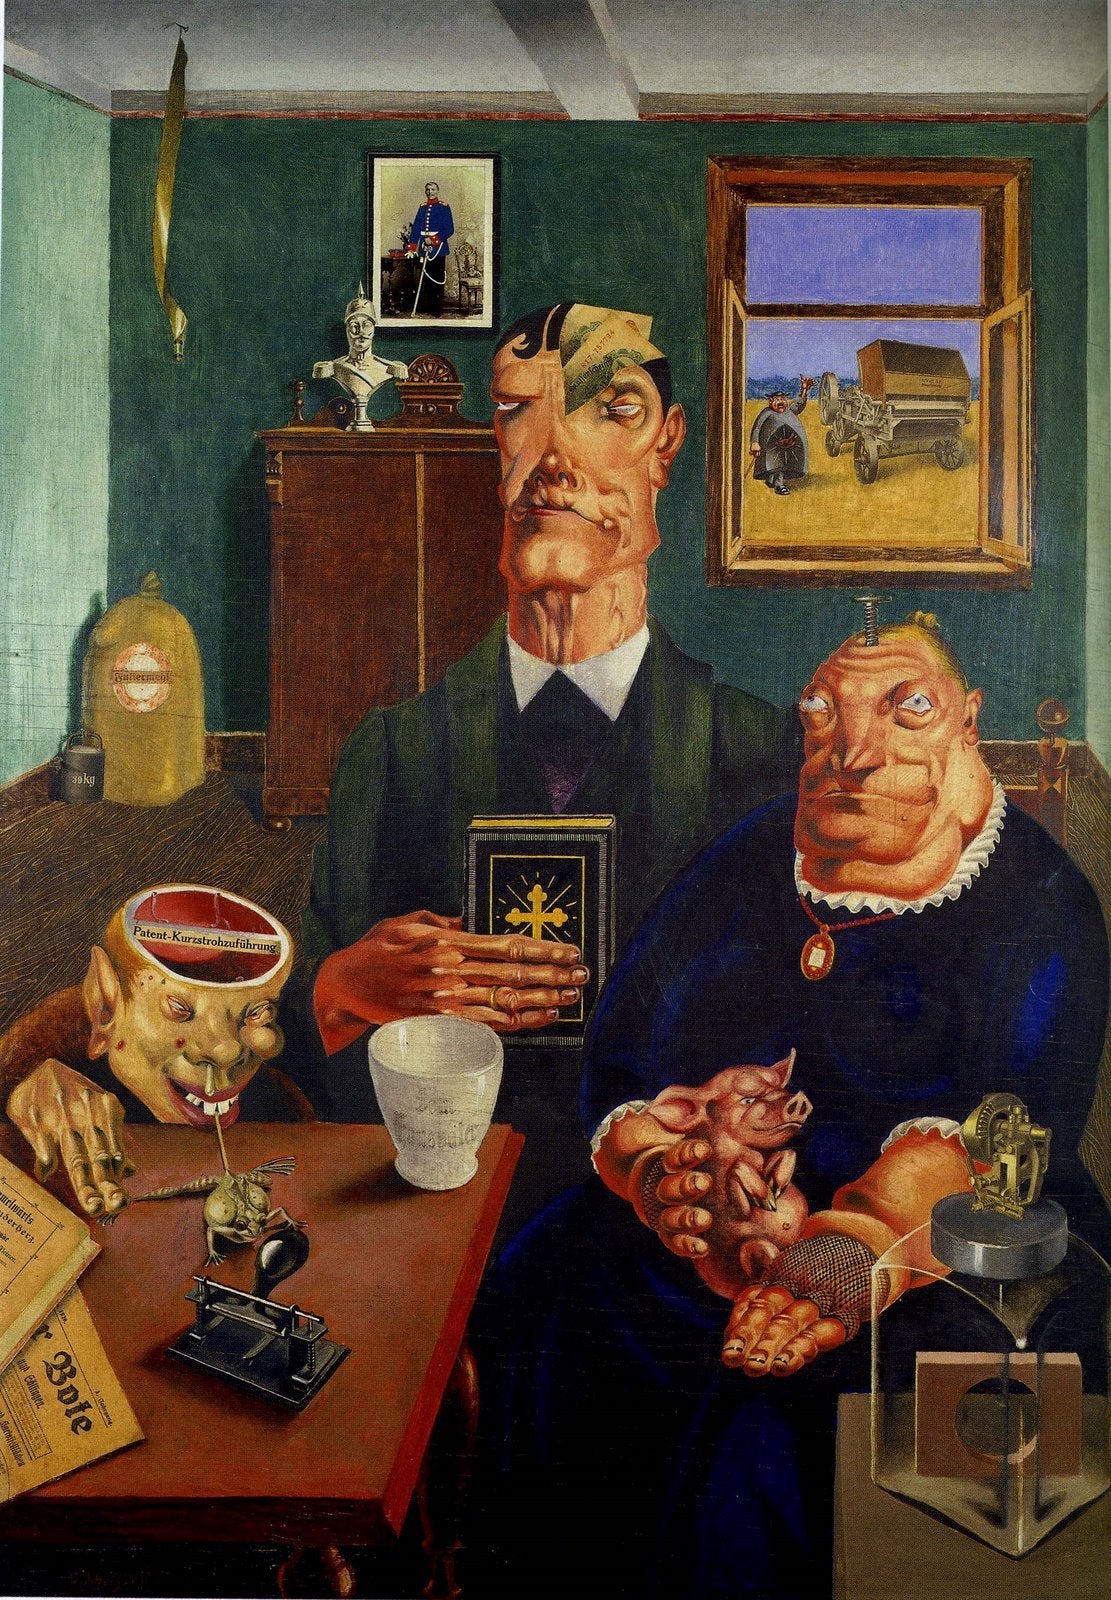 Georg Scholz, Bauernbild (Farmer Picture), also known as Industrial Farmers, 1920, oil on wood with collage and photomontage, 98 x 70 cm (Von der Heydt-Museum Wuppertal)